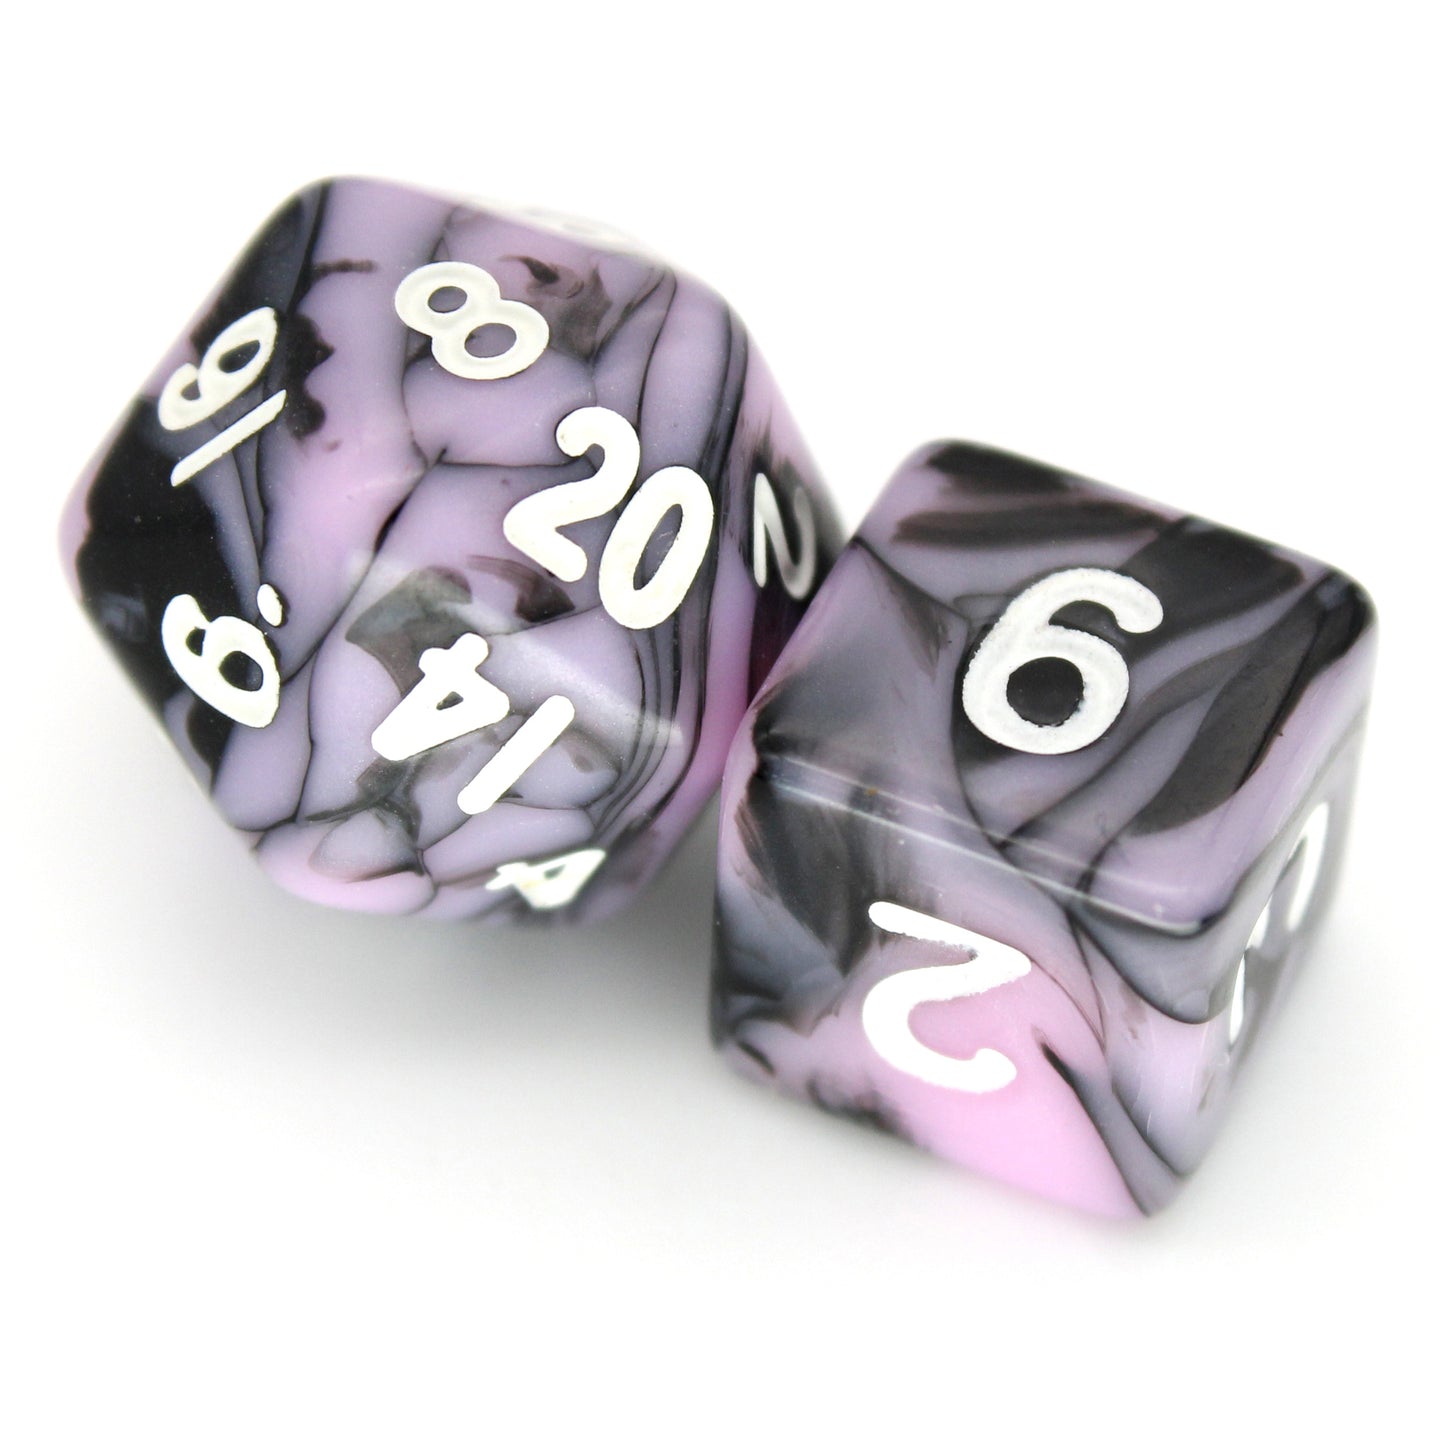 D'vas is a 7-piece 13mm resin dice set with swirls of black and pink, inked in white. It belongs to our tiny but mighty Wee Lads collection.